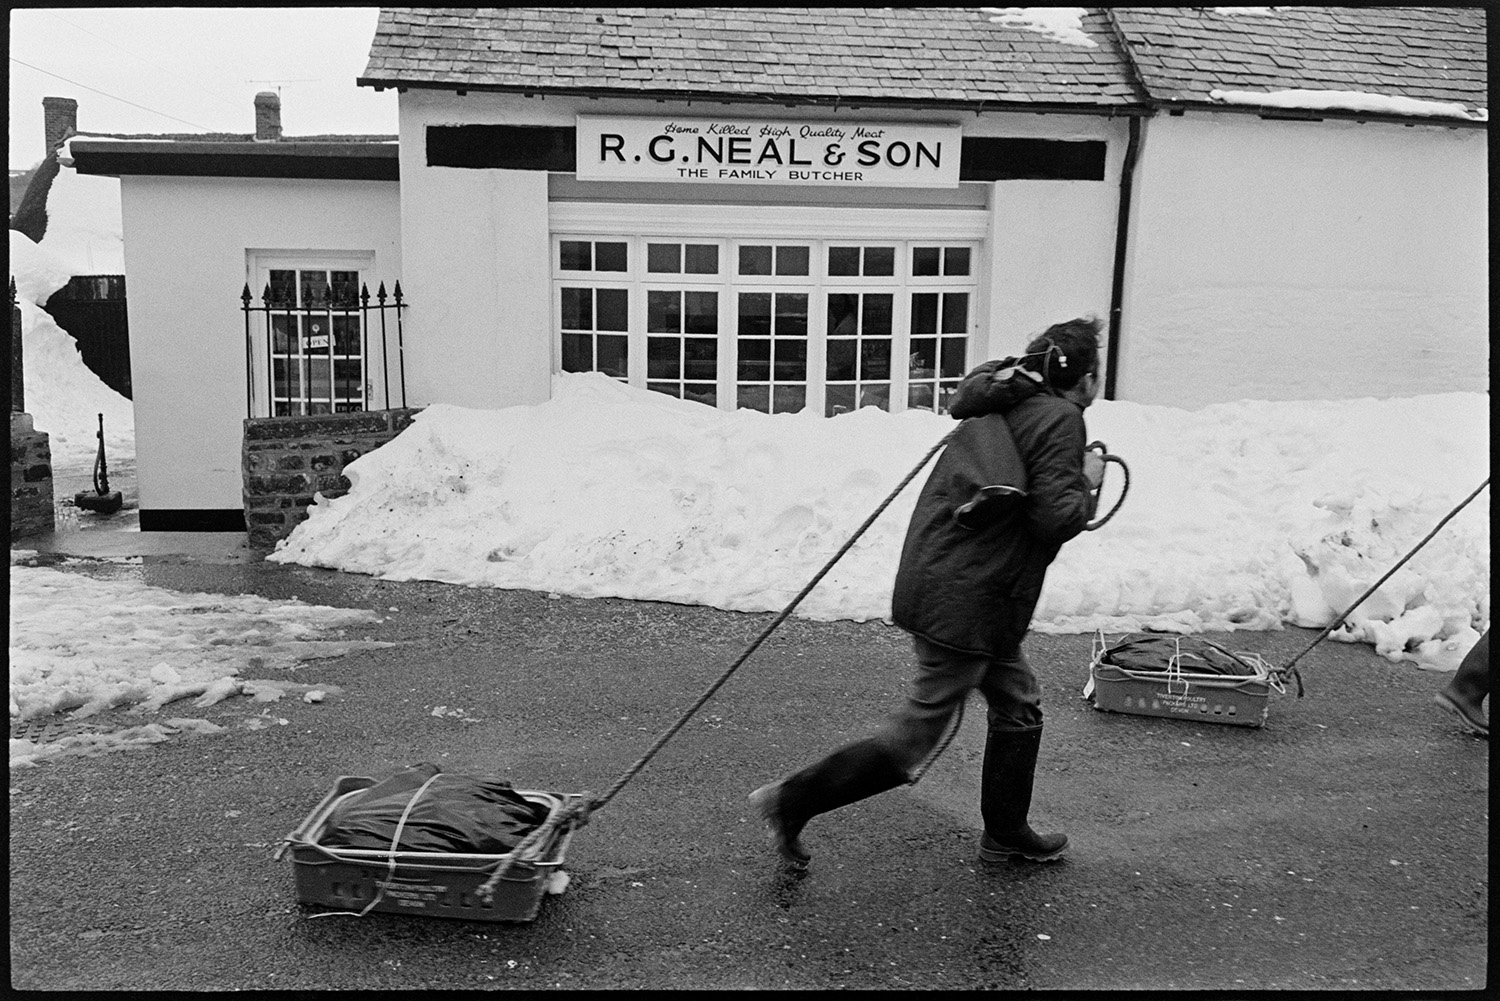 Snow, butcher setting off with meat on sledge for next village, Merton cut off. 
[Bill Davey, butcher, and another person dragging sledges with meat past R G Neal & Son butcher's shop in Dolton. They are going to deliver the meat to Merton which was cut off in the snow.]